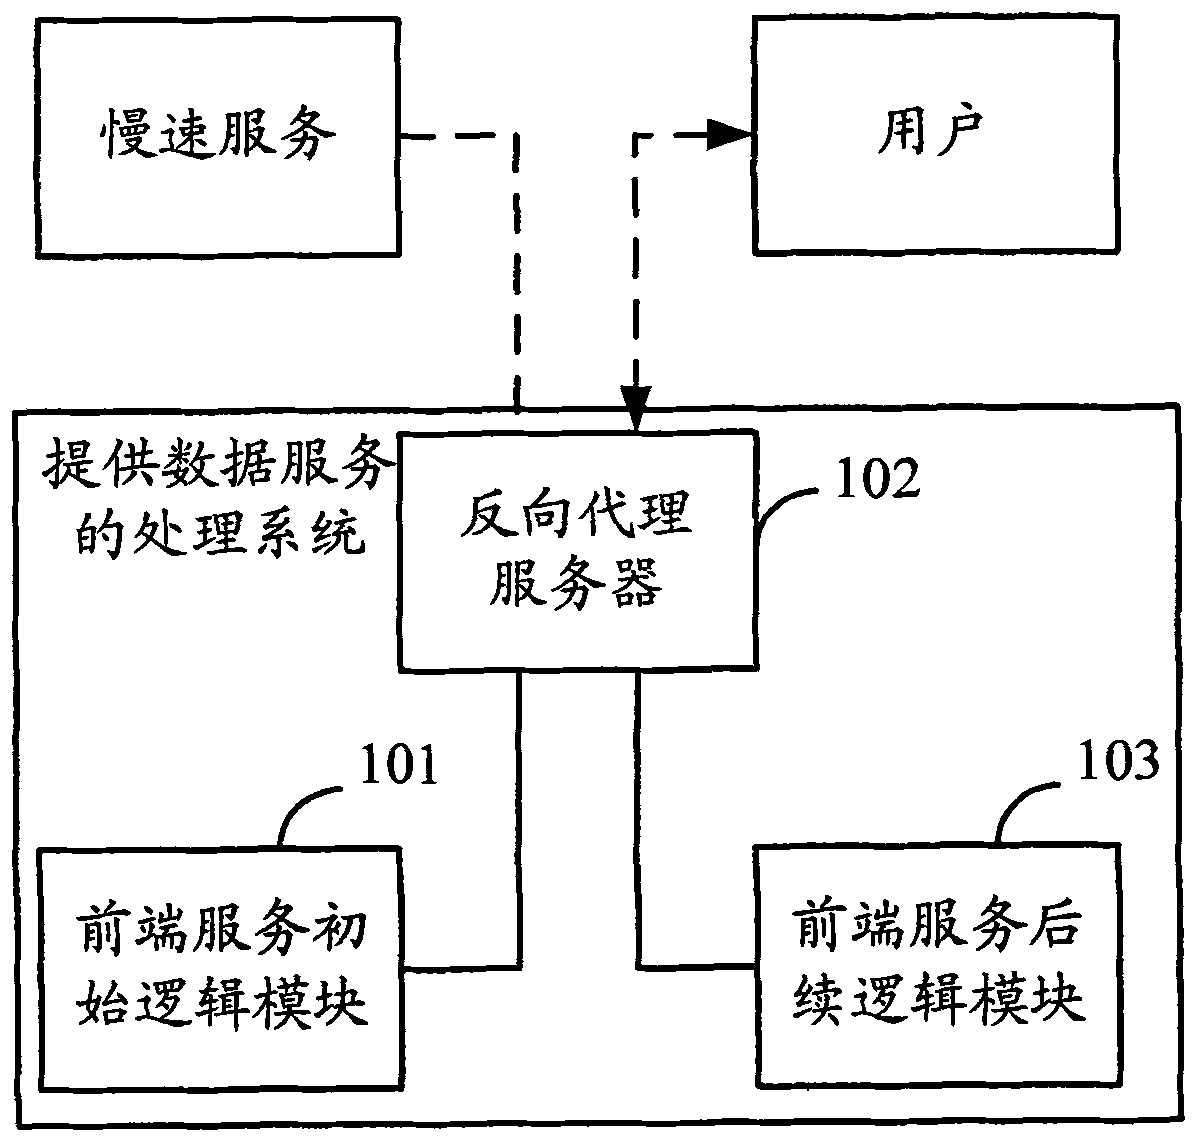 Processing system and method for providing data service